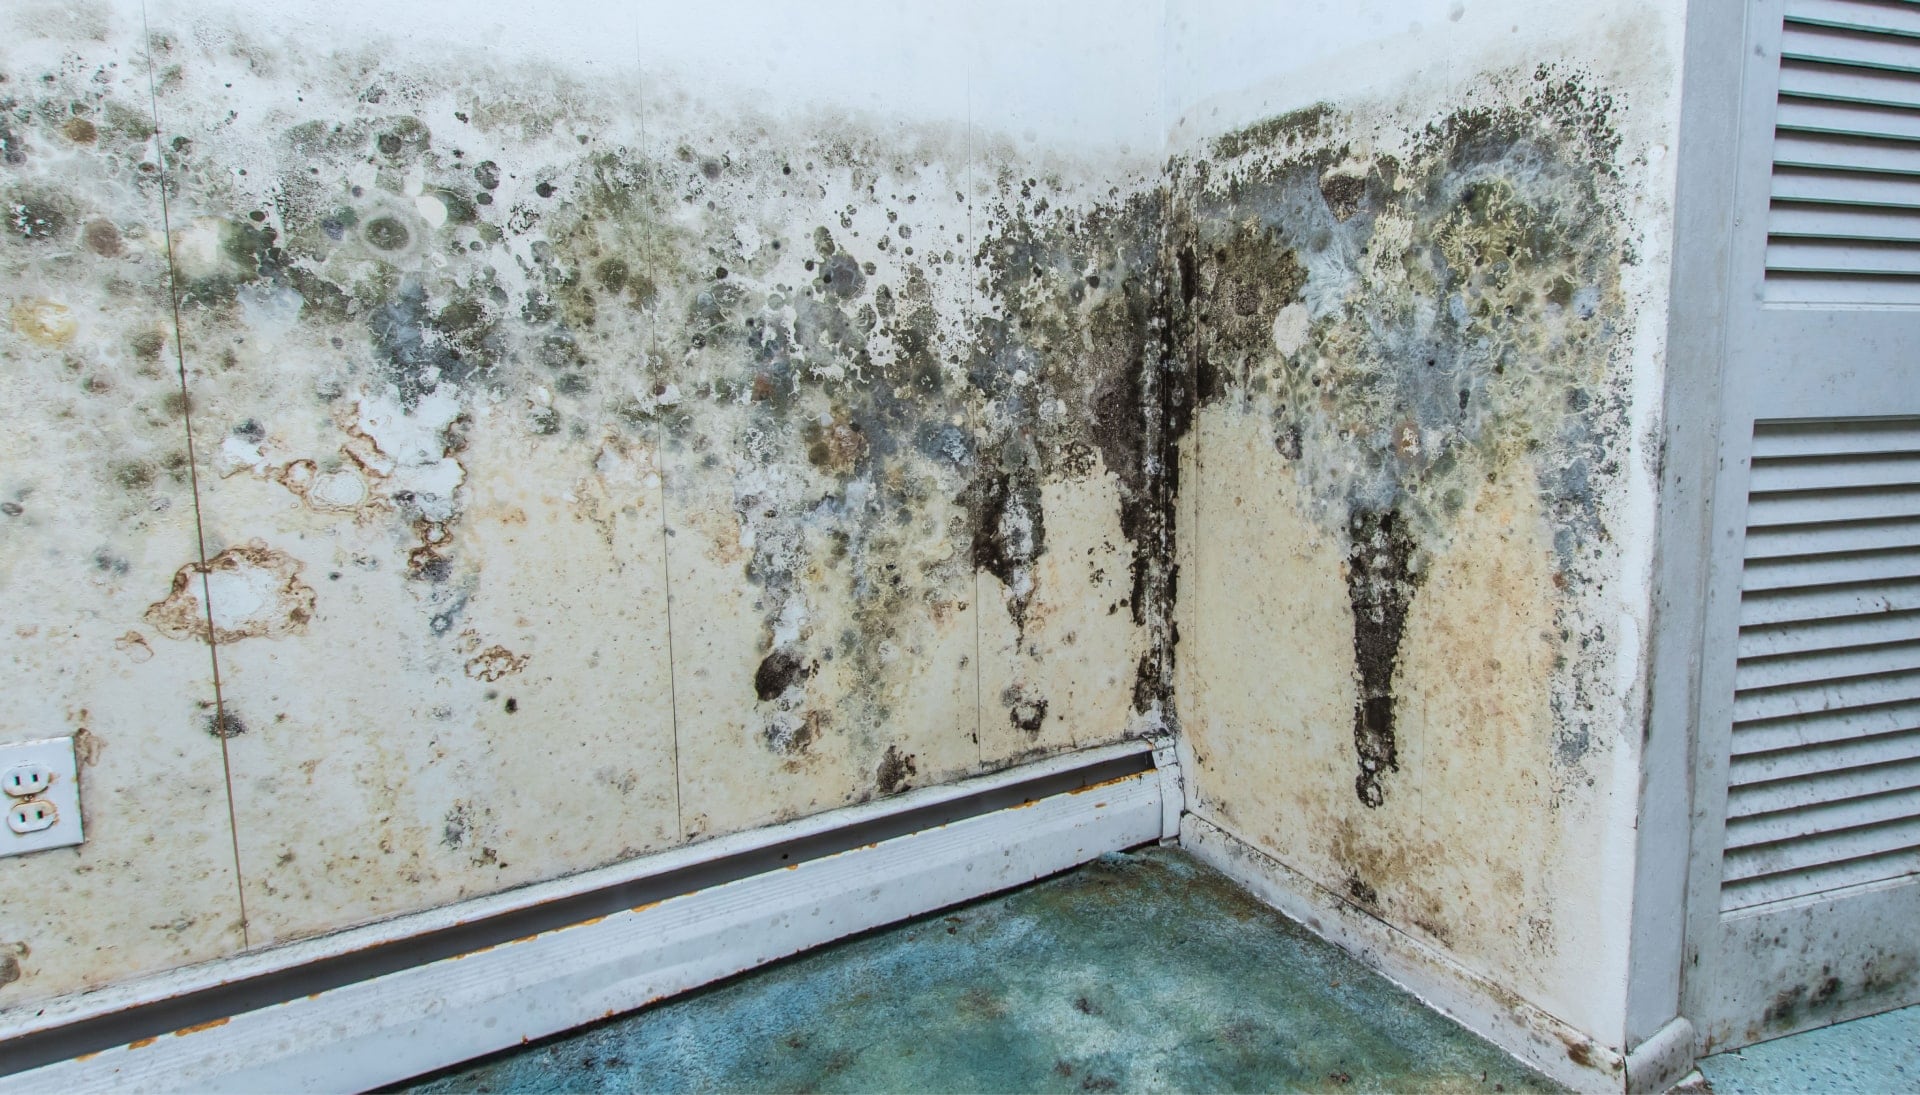 Professional mold removal, odor control, and water damage restoration service in Lexington, SC.